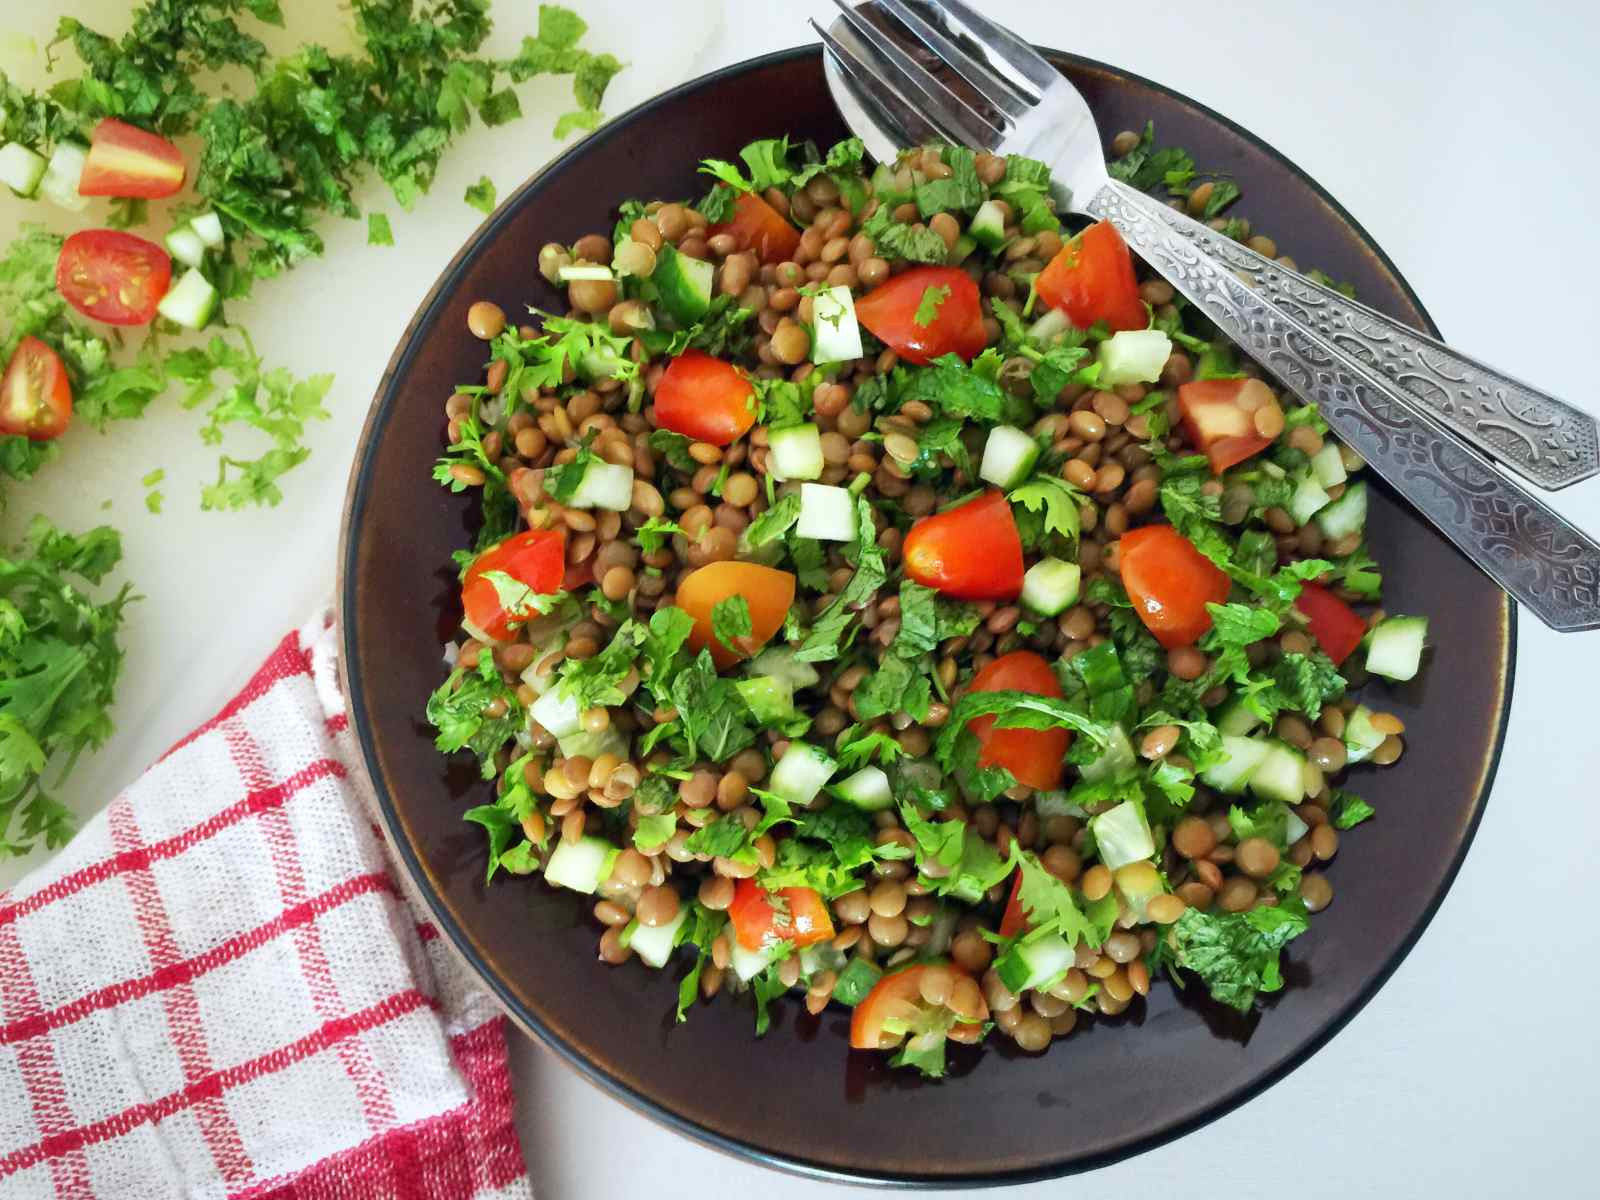 Vegetarian Middle Eastern Recipes Best Of Lentil Tabbouleh Recipe Middle Eastern Ve Arian Salad